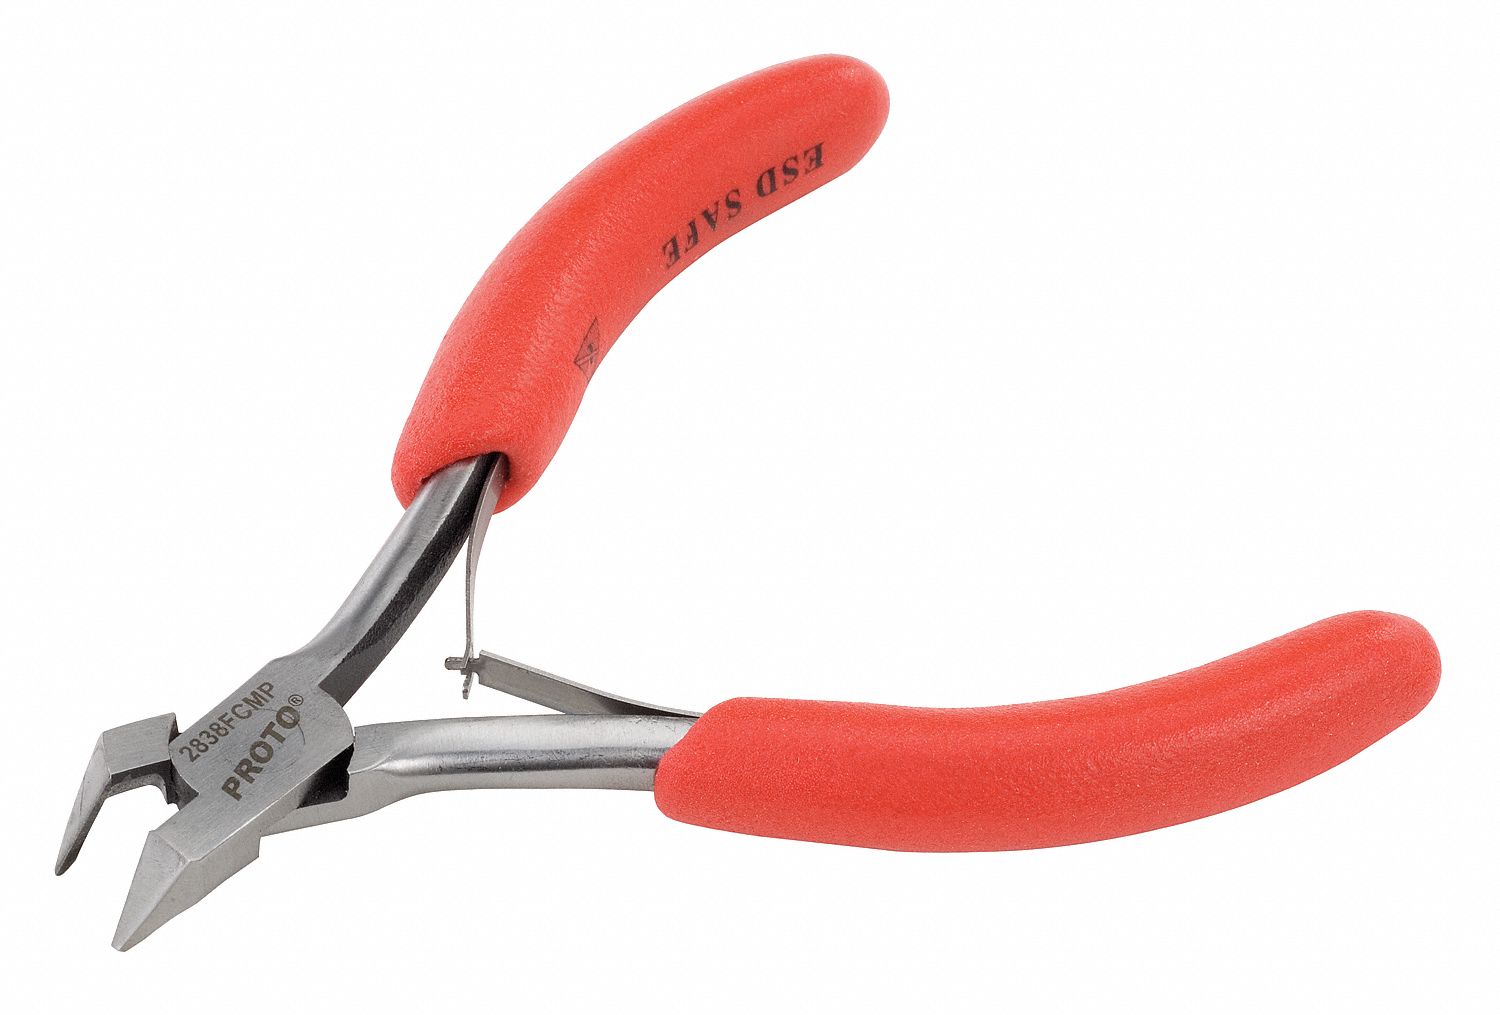 SIDE CUTTERS precision wire snips hardened steel jaws Japanese Engineer NSX-04 